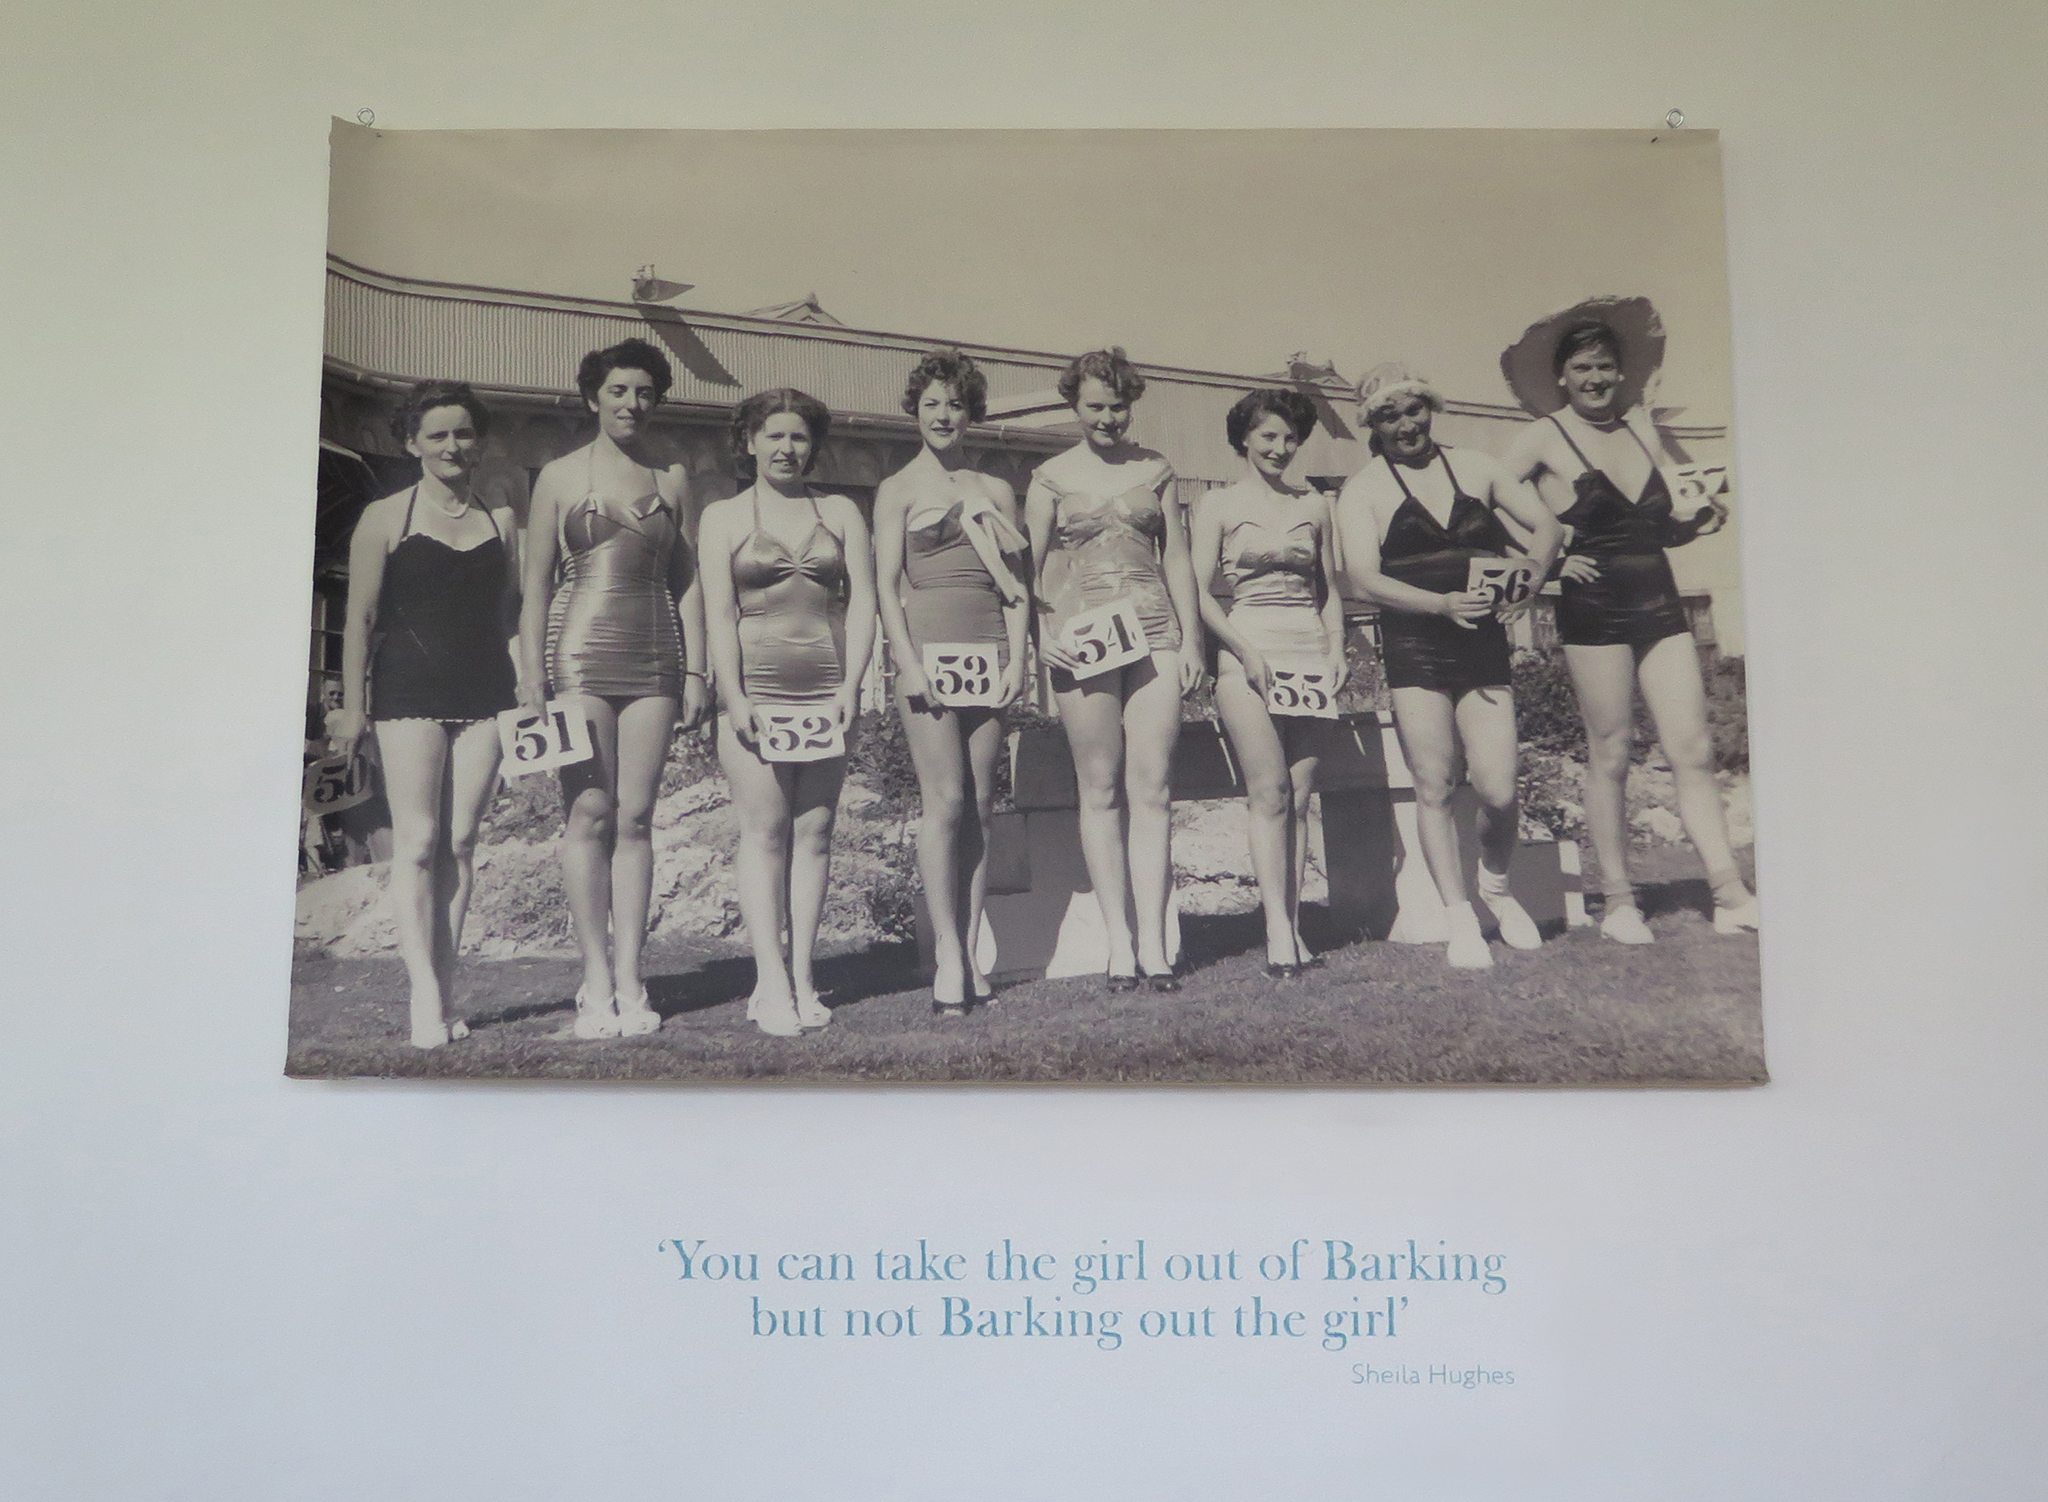 A black and white photograph of a beauty contest with a quote about being a 'Barking girl'